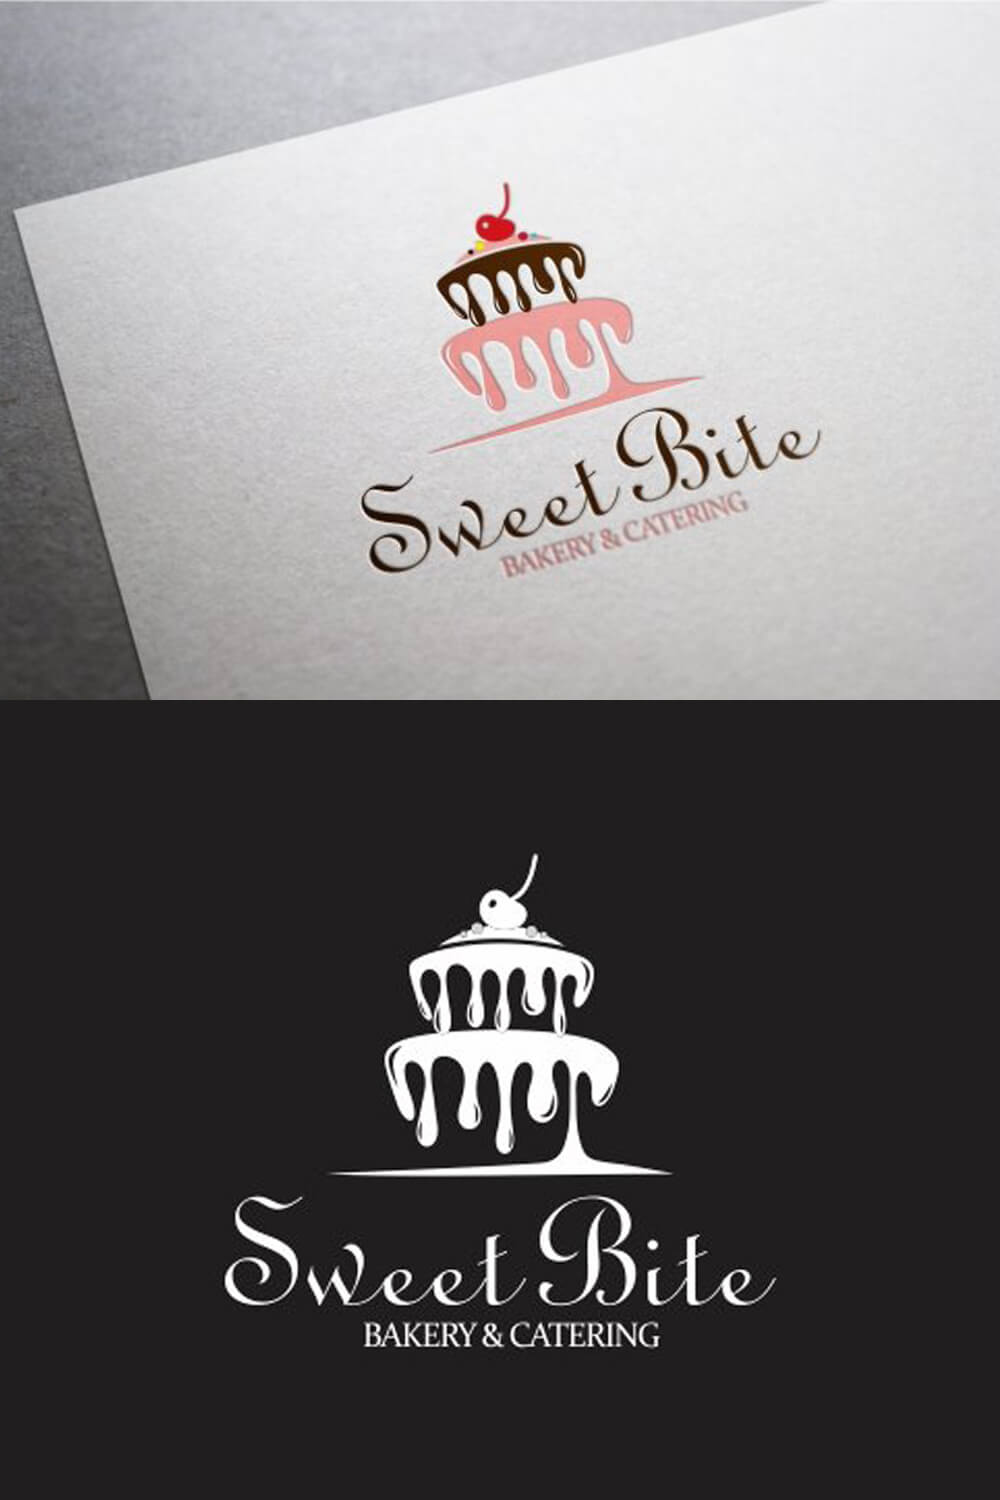 Two "Sweet Bite" logos, one on white paper and one on a black background.